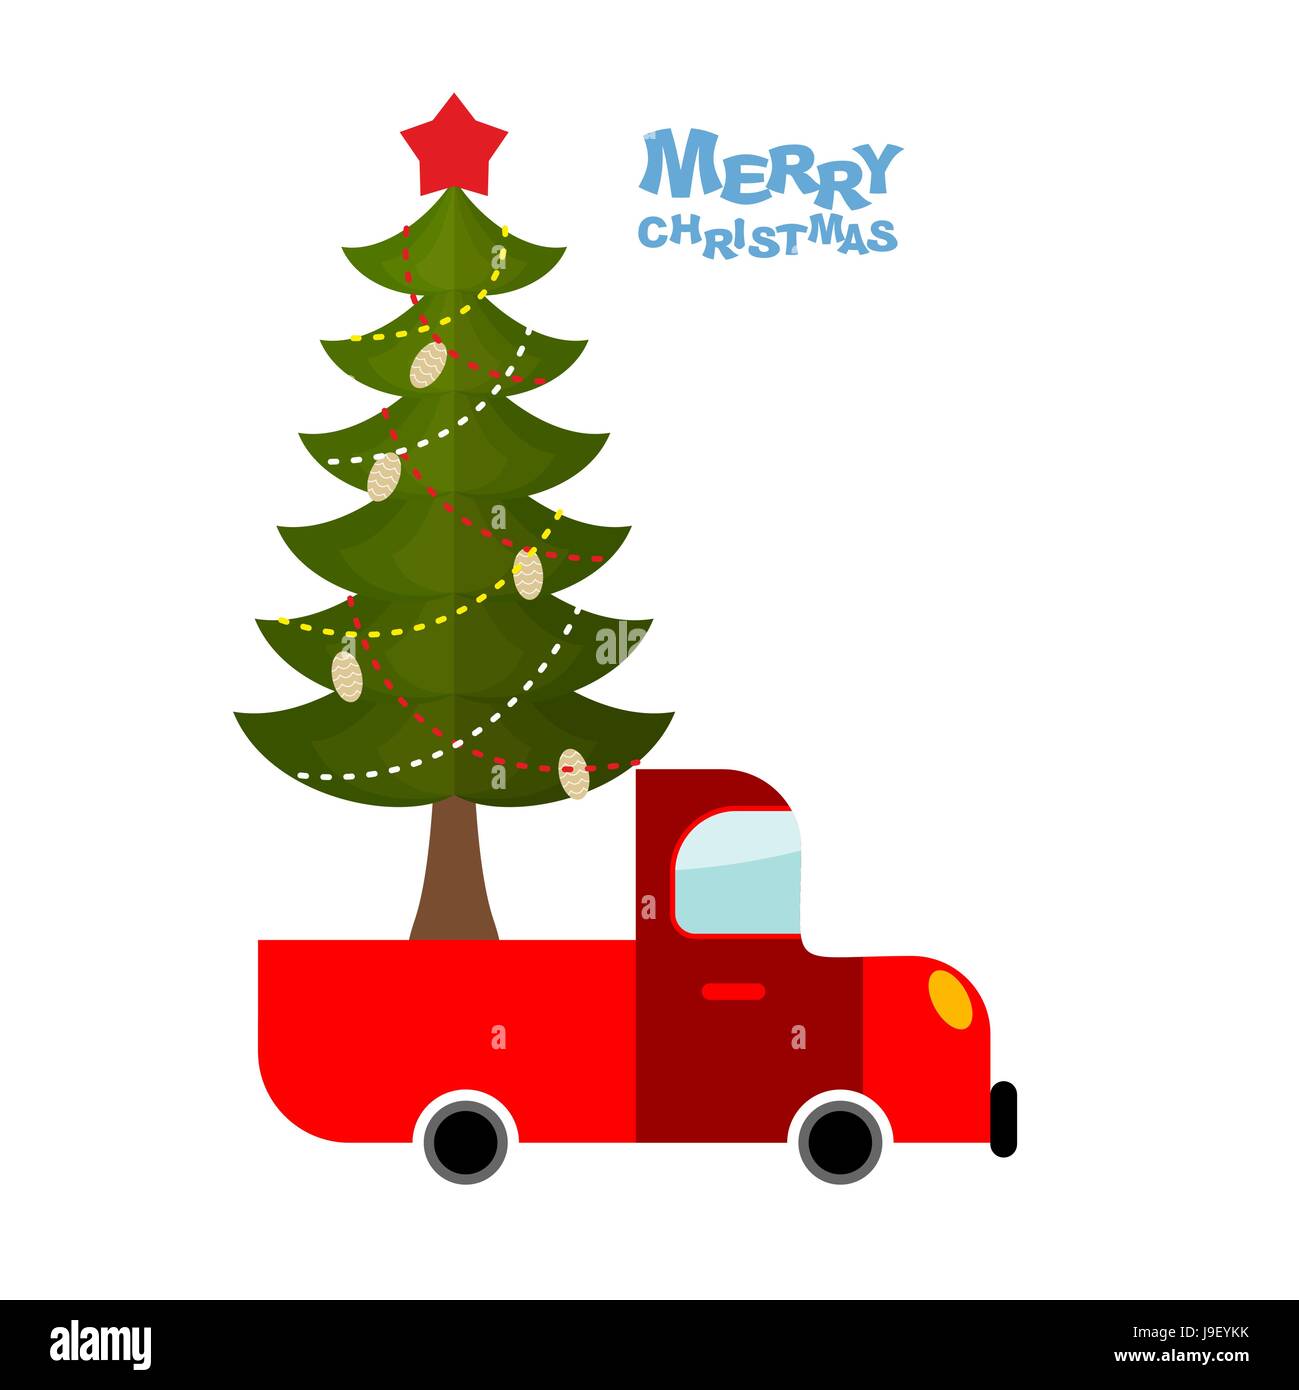 Christmas tree in car. Truck carries decorated Christmas tree for holiday. Garlands and bumps and Red Star. Happy Christmas. Stock Vector